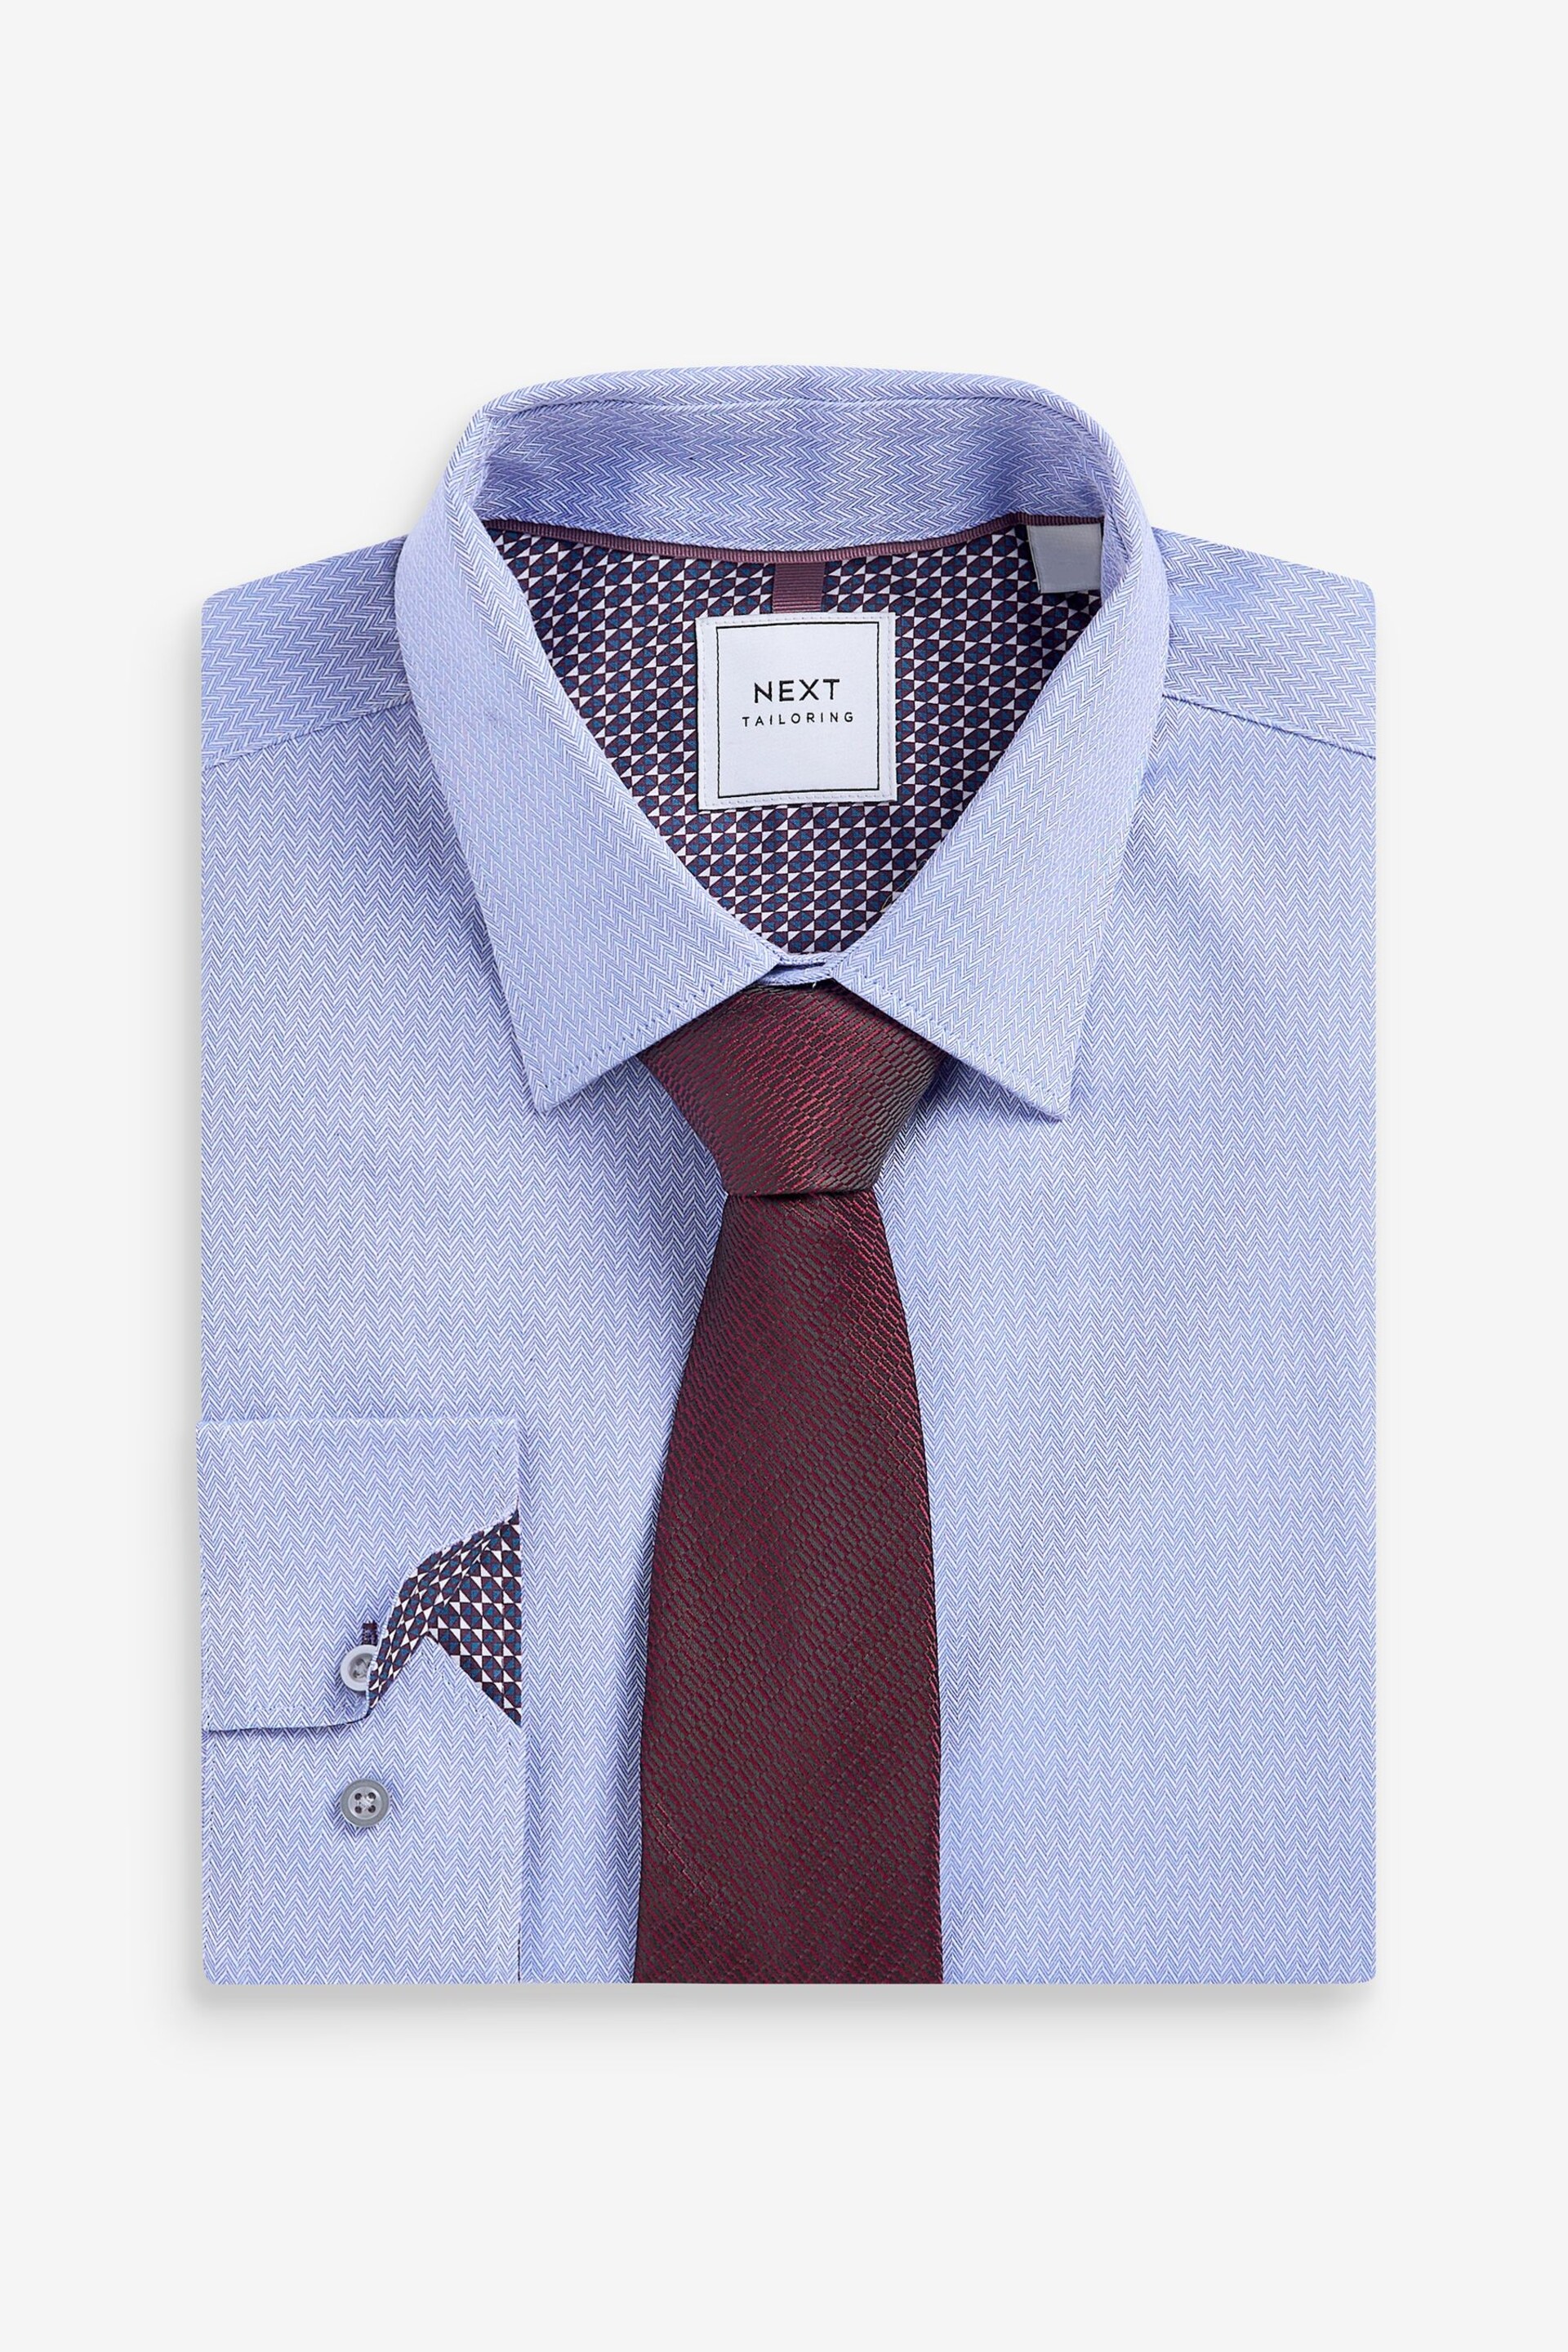 Light Blue/Burgundy Red Textured Regular Fit Single Cuff Shirt And Tie Pack - Image 6 of 8